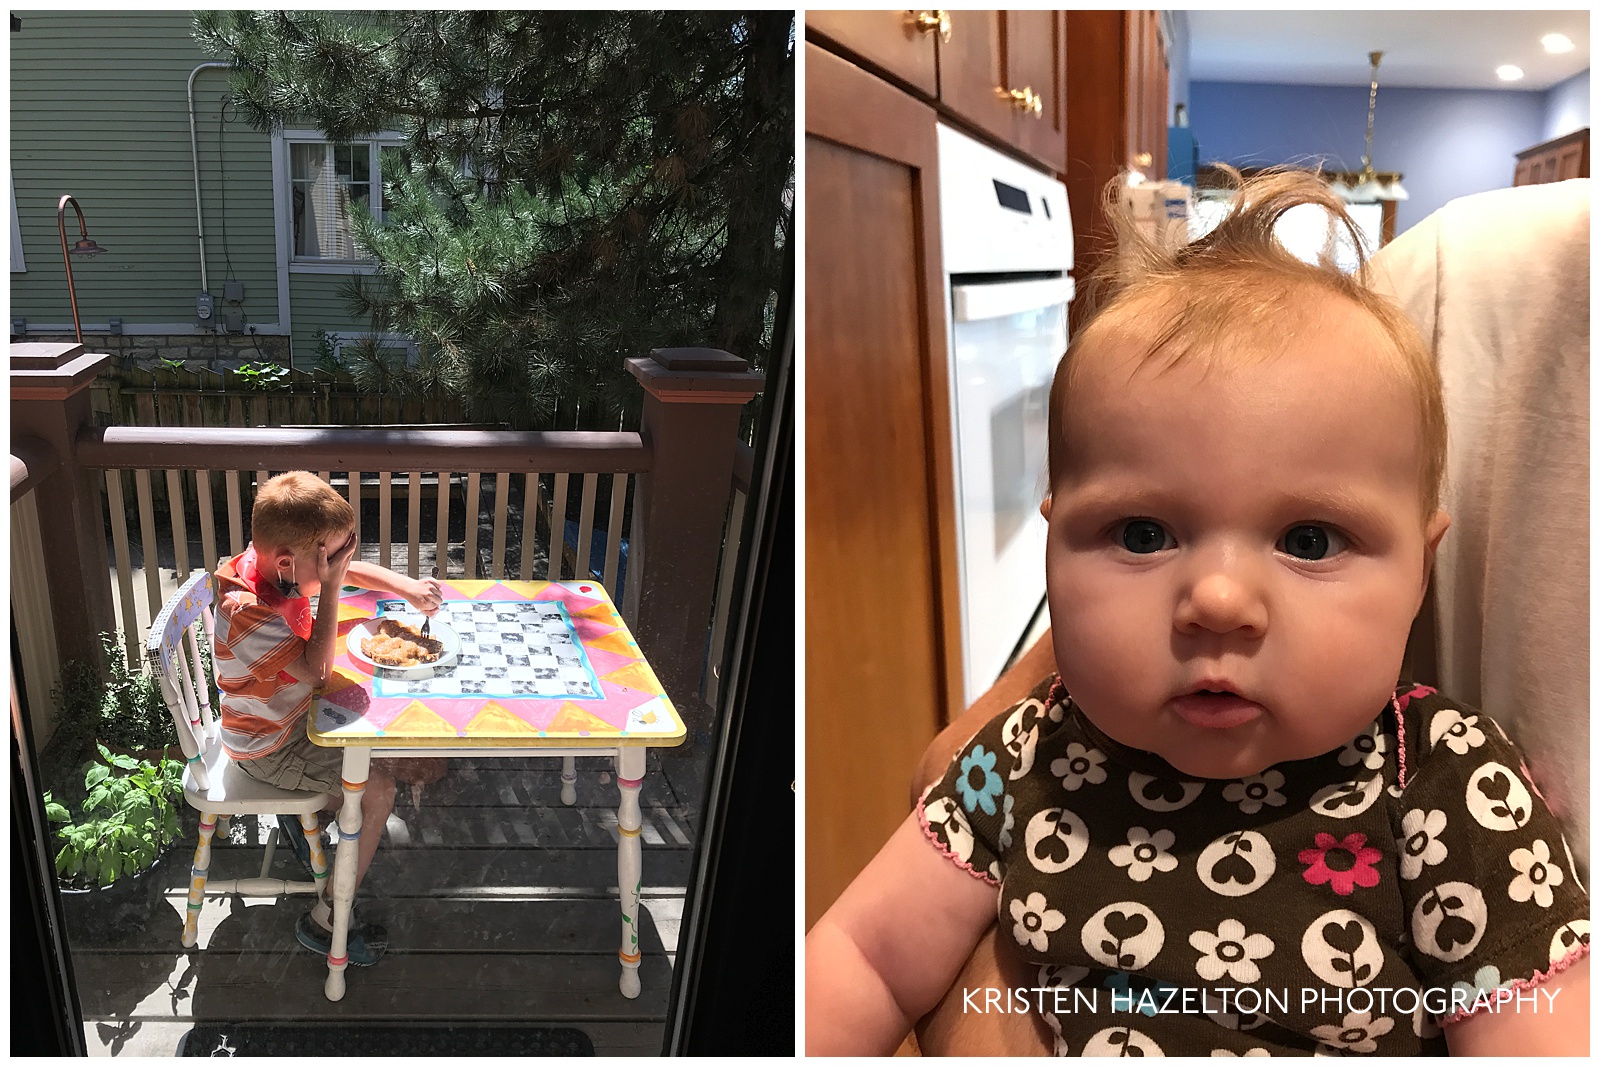 A toddler enjoying impromptu al fresco dining, and a baby with big hair curls